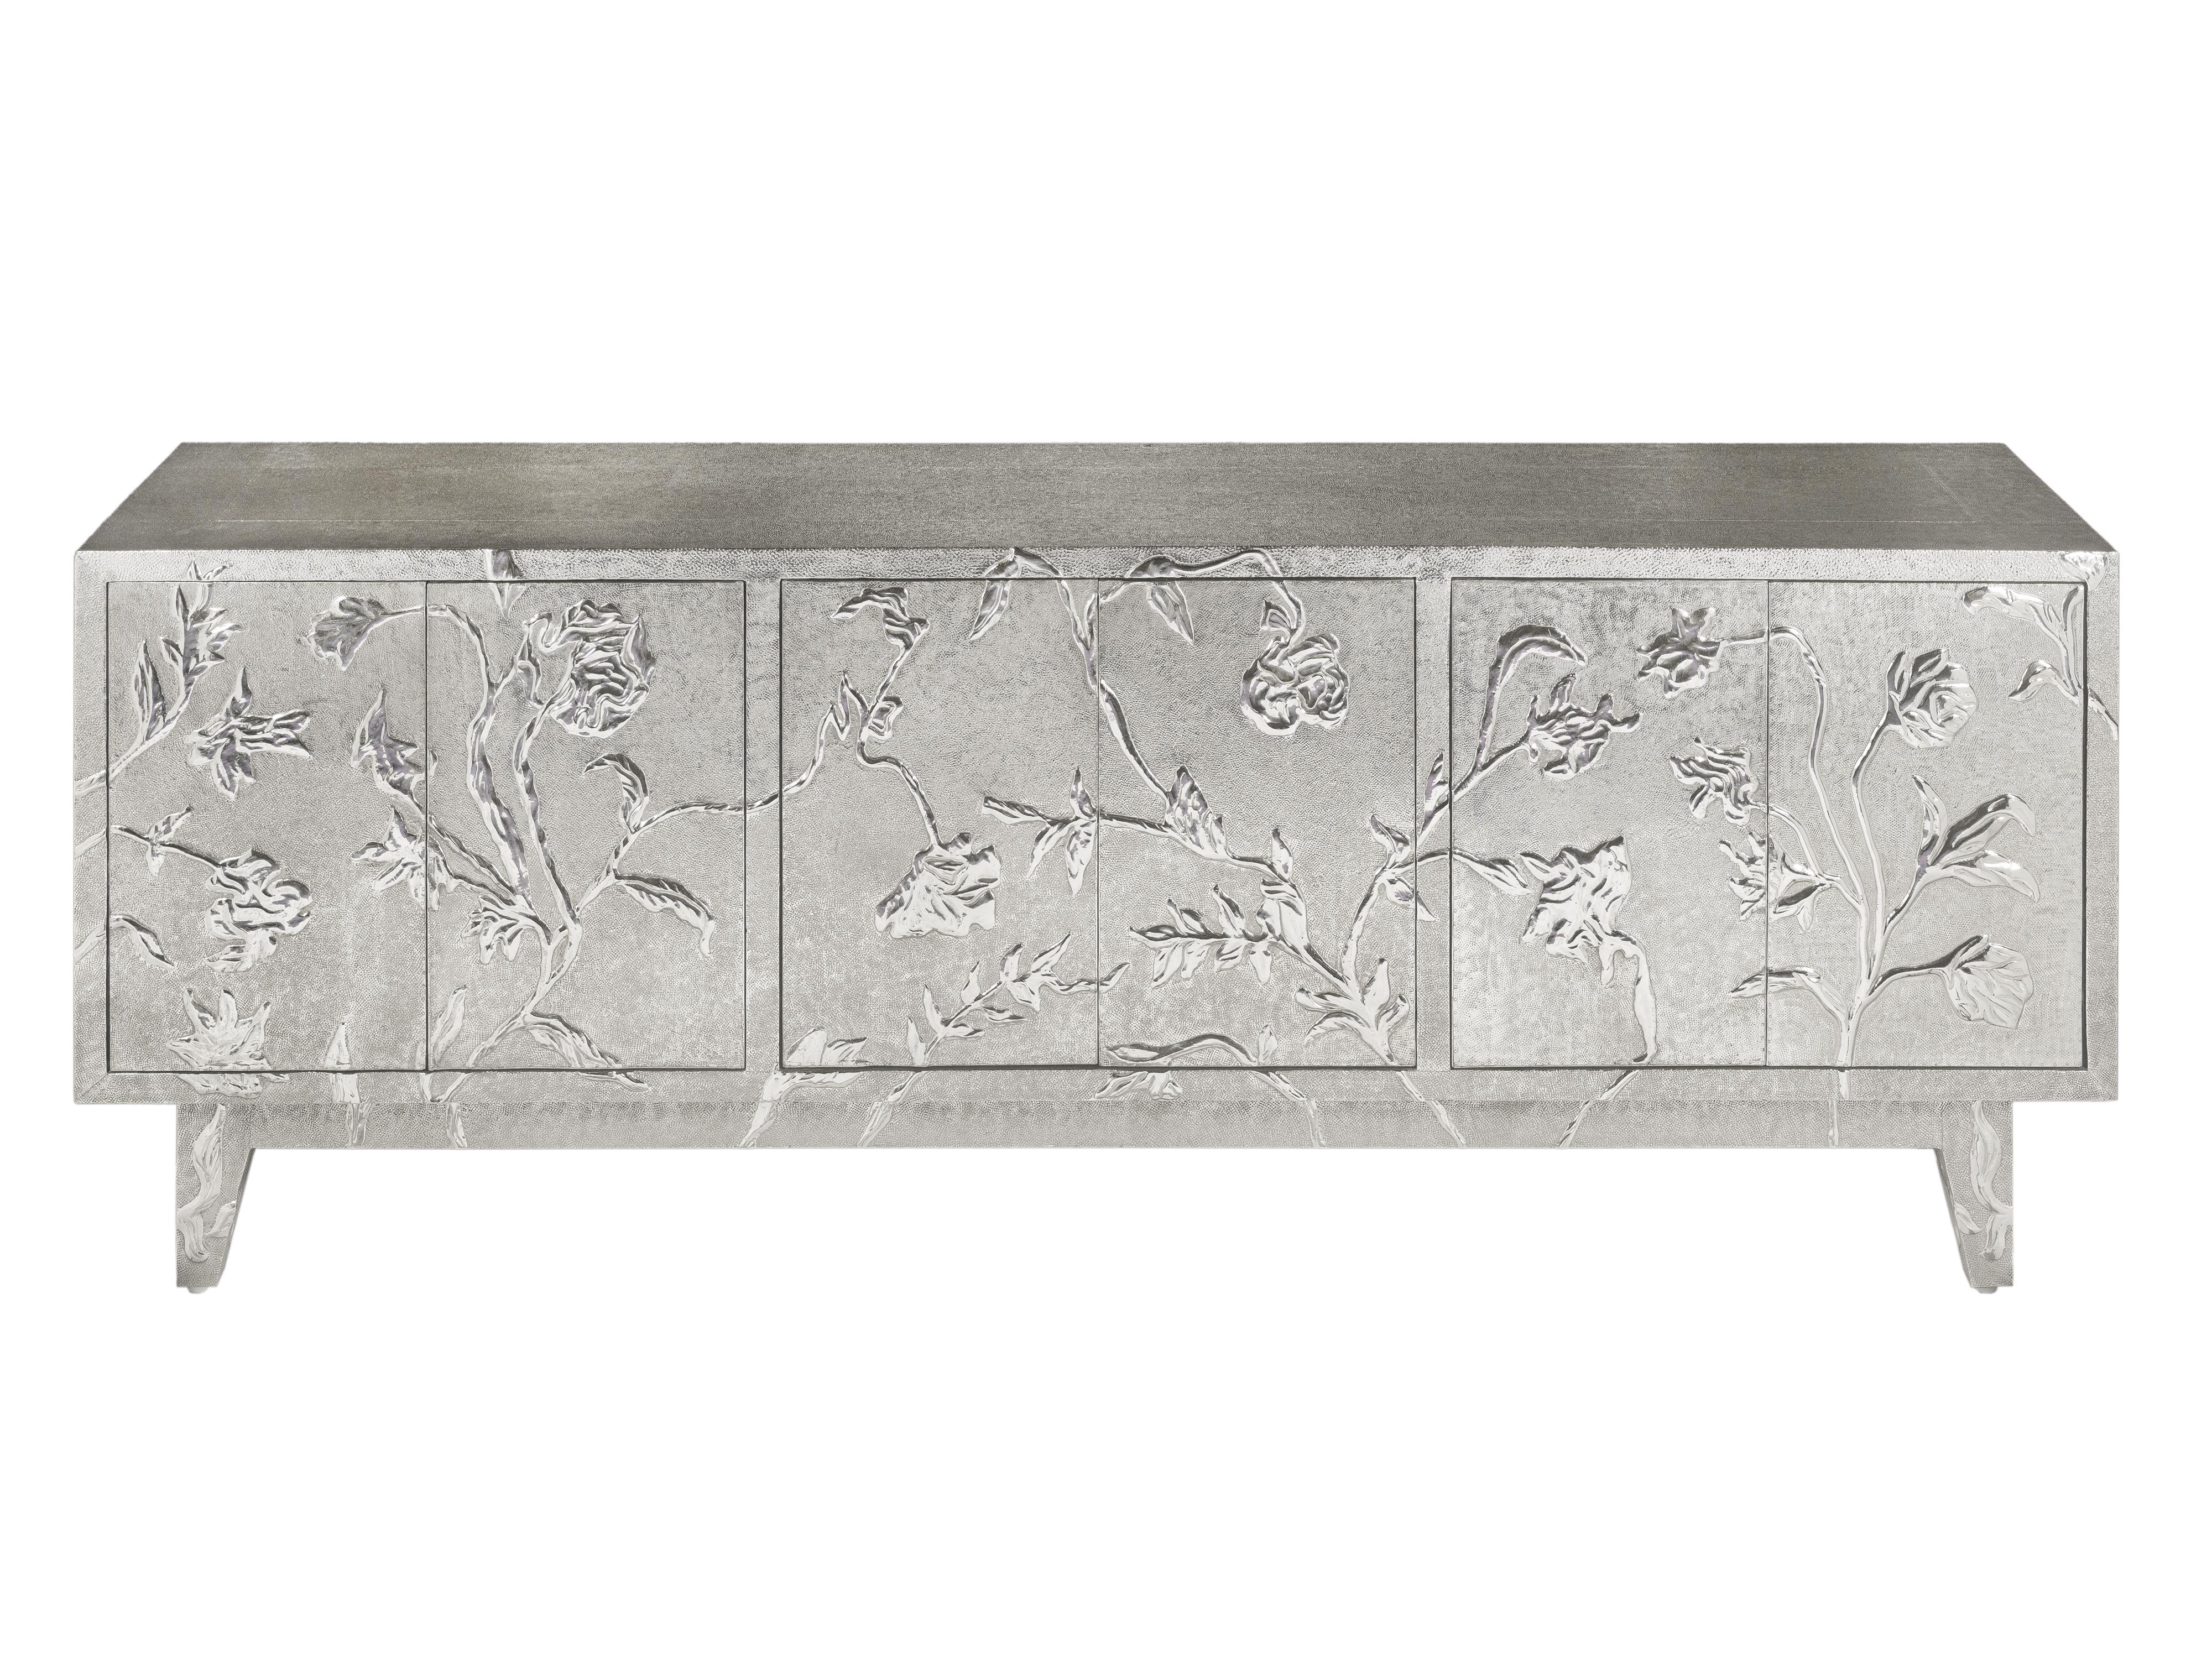 Indian Art Deco Sideboard Floral Hand Carved White Bronze Clad on Wood by Paul Mathieu For Sale